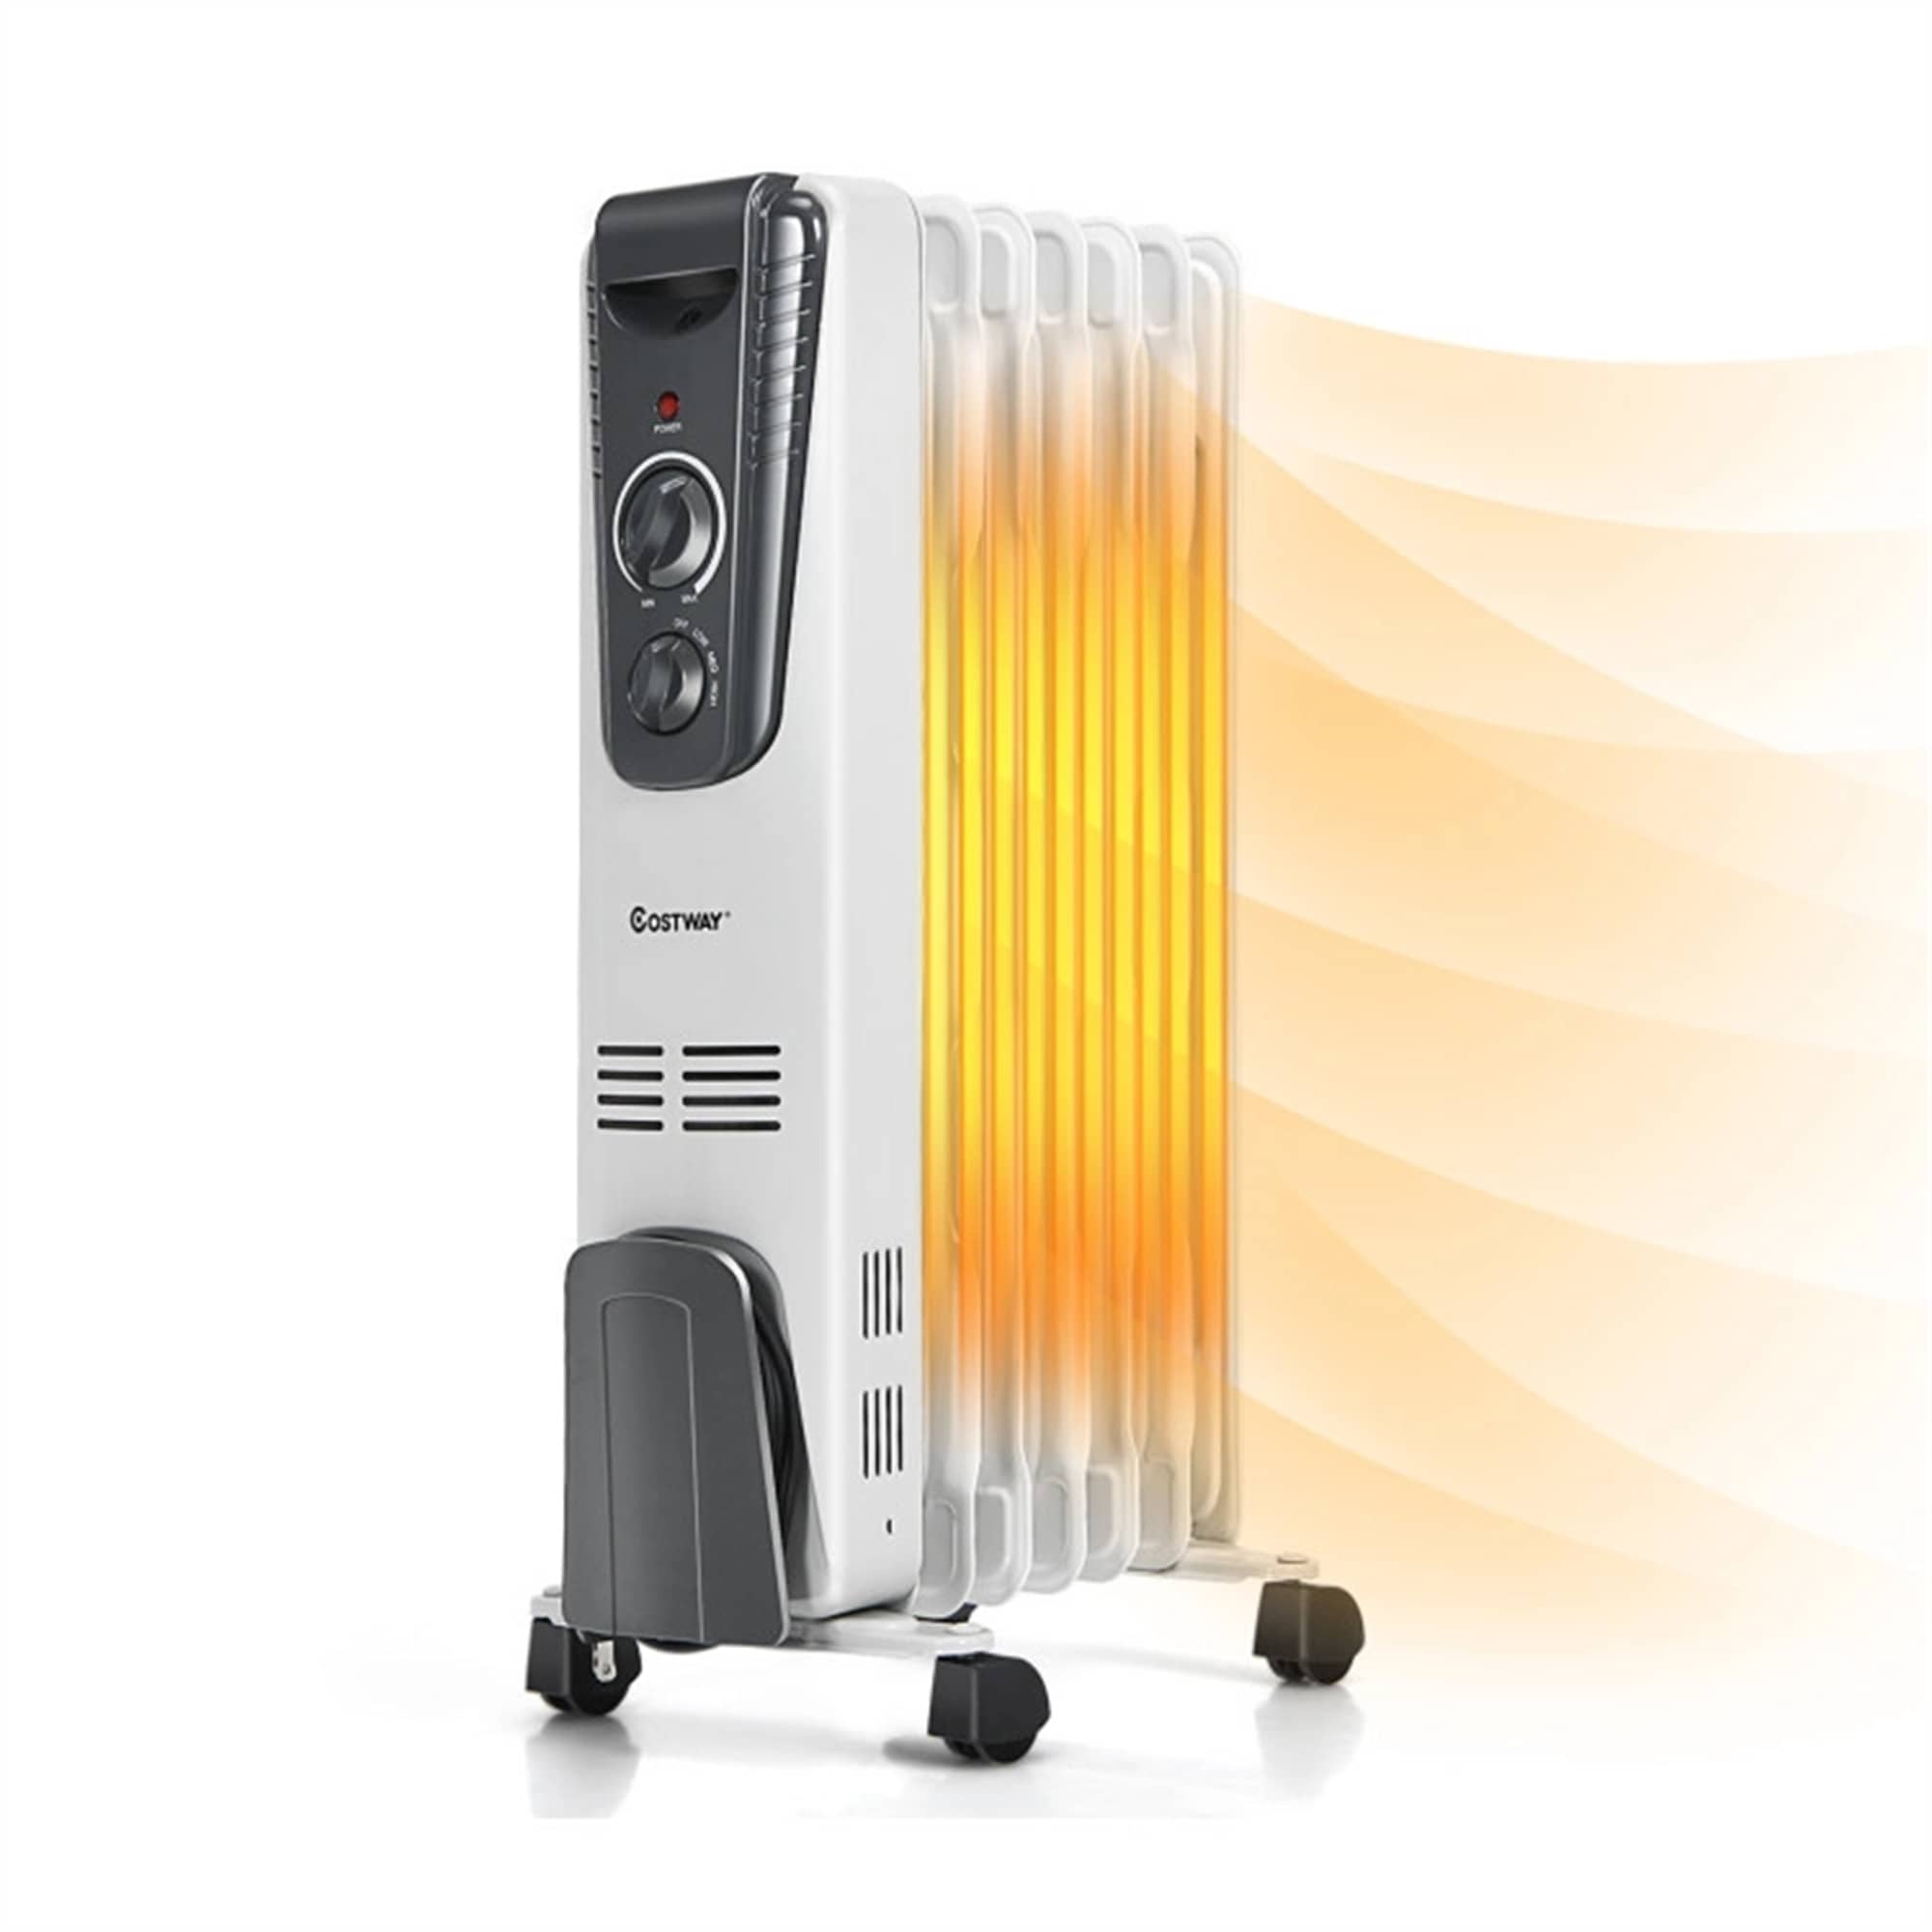 CASAINC 1500 W Electric Portable Oil Filled Space Heater with Adjustable Thermostat